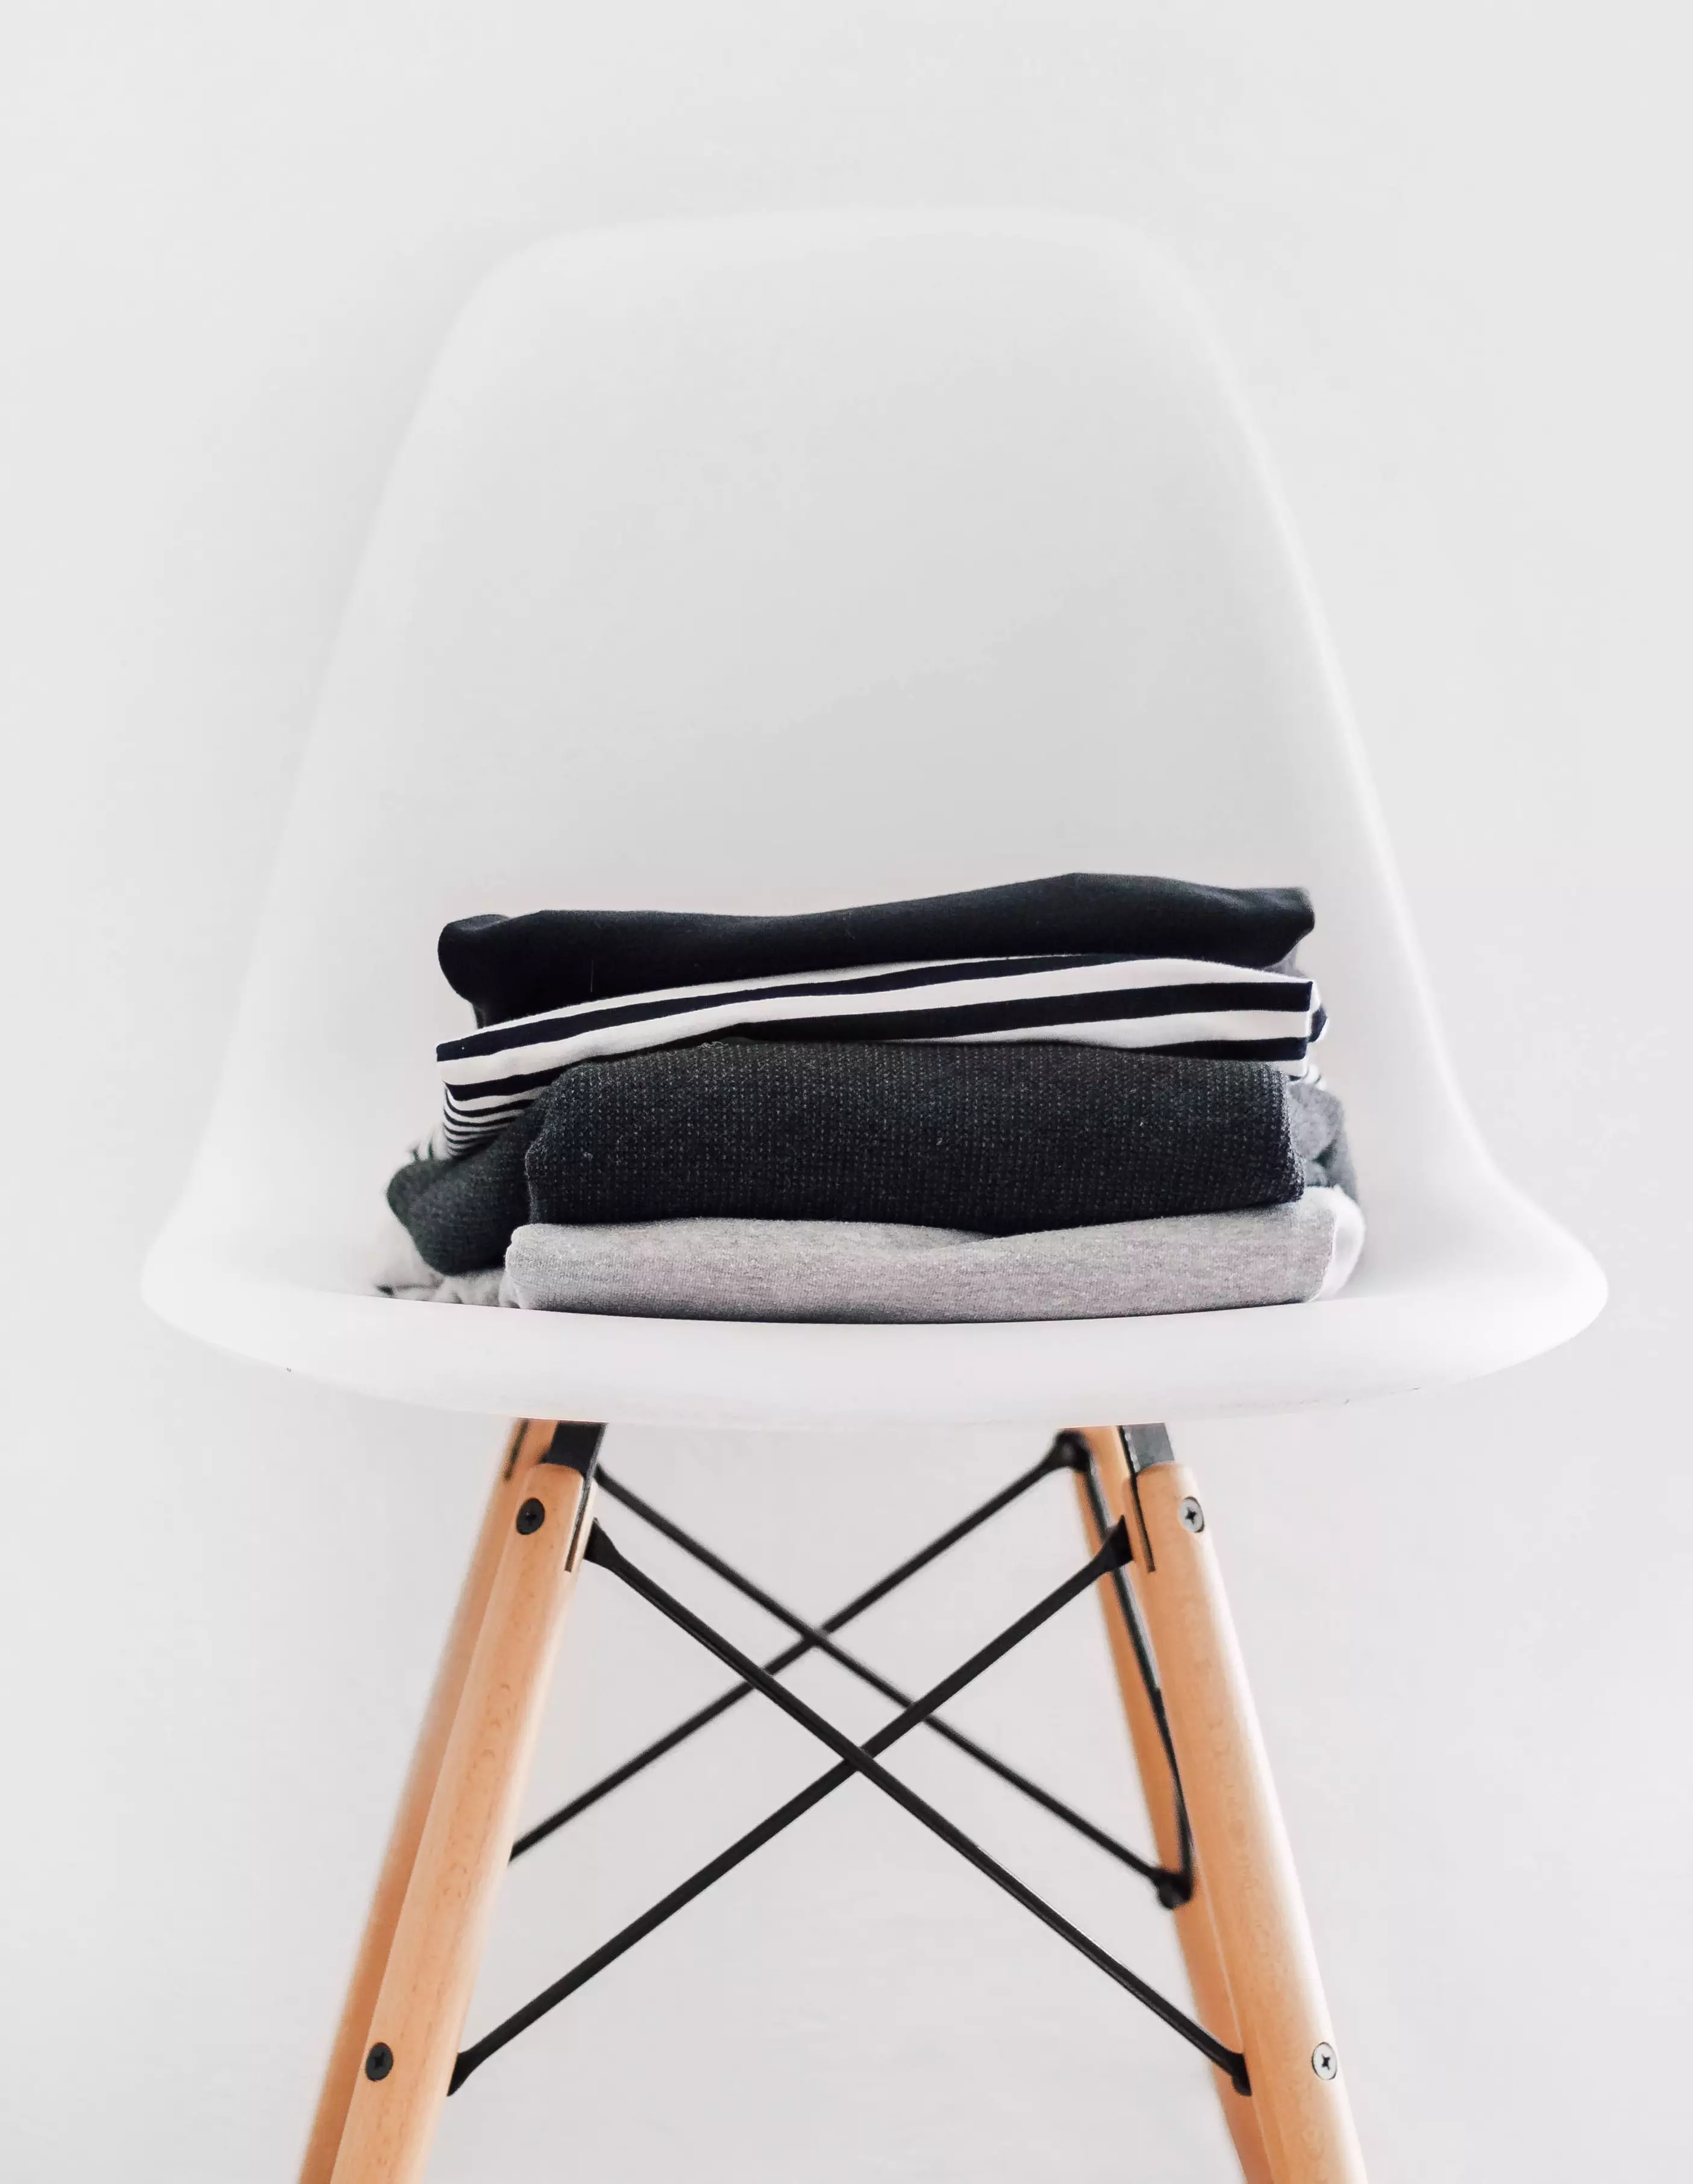 No more piling your clothes high on a chair (